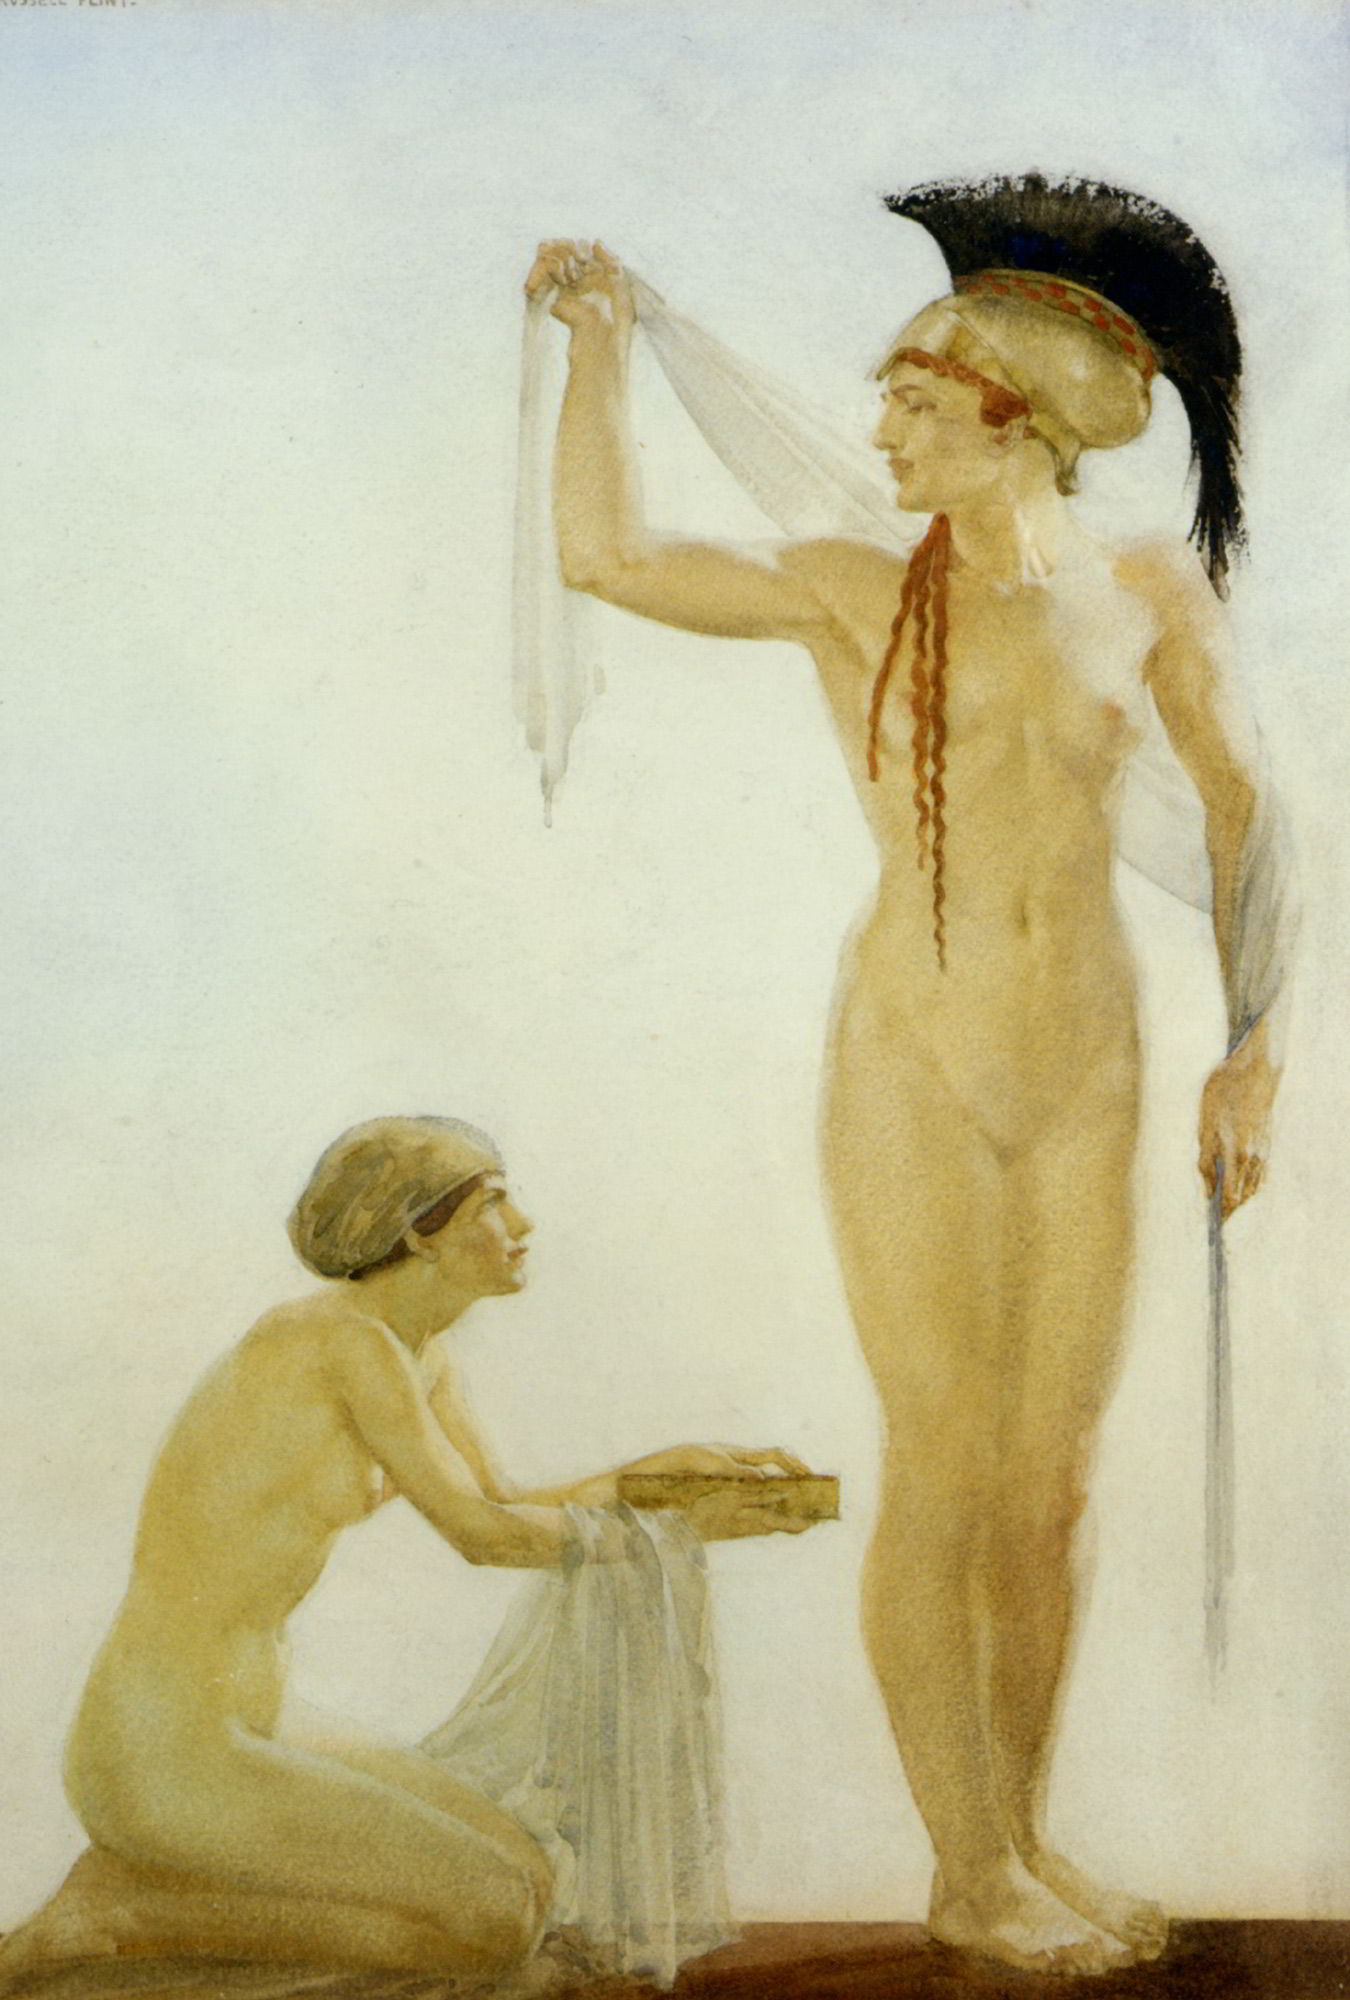 Pallais Athene by Sir William Russell Flint